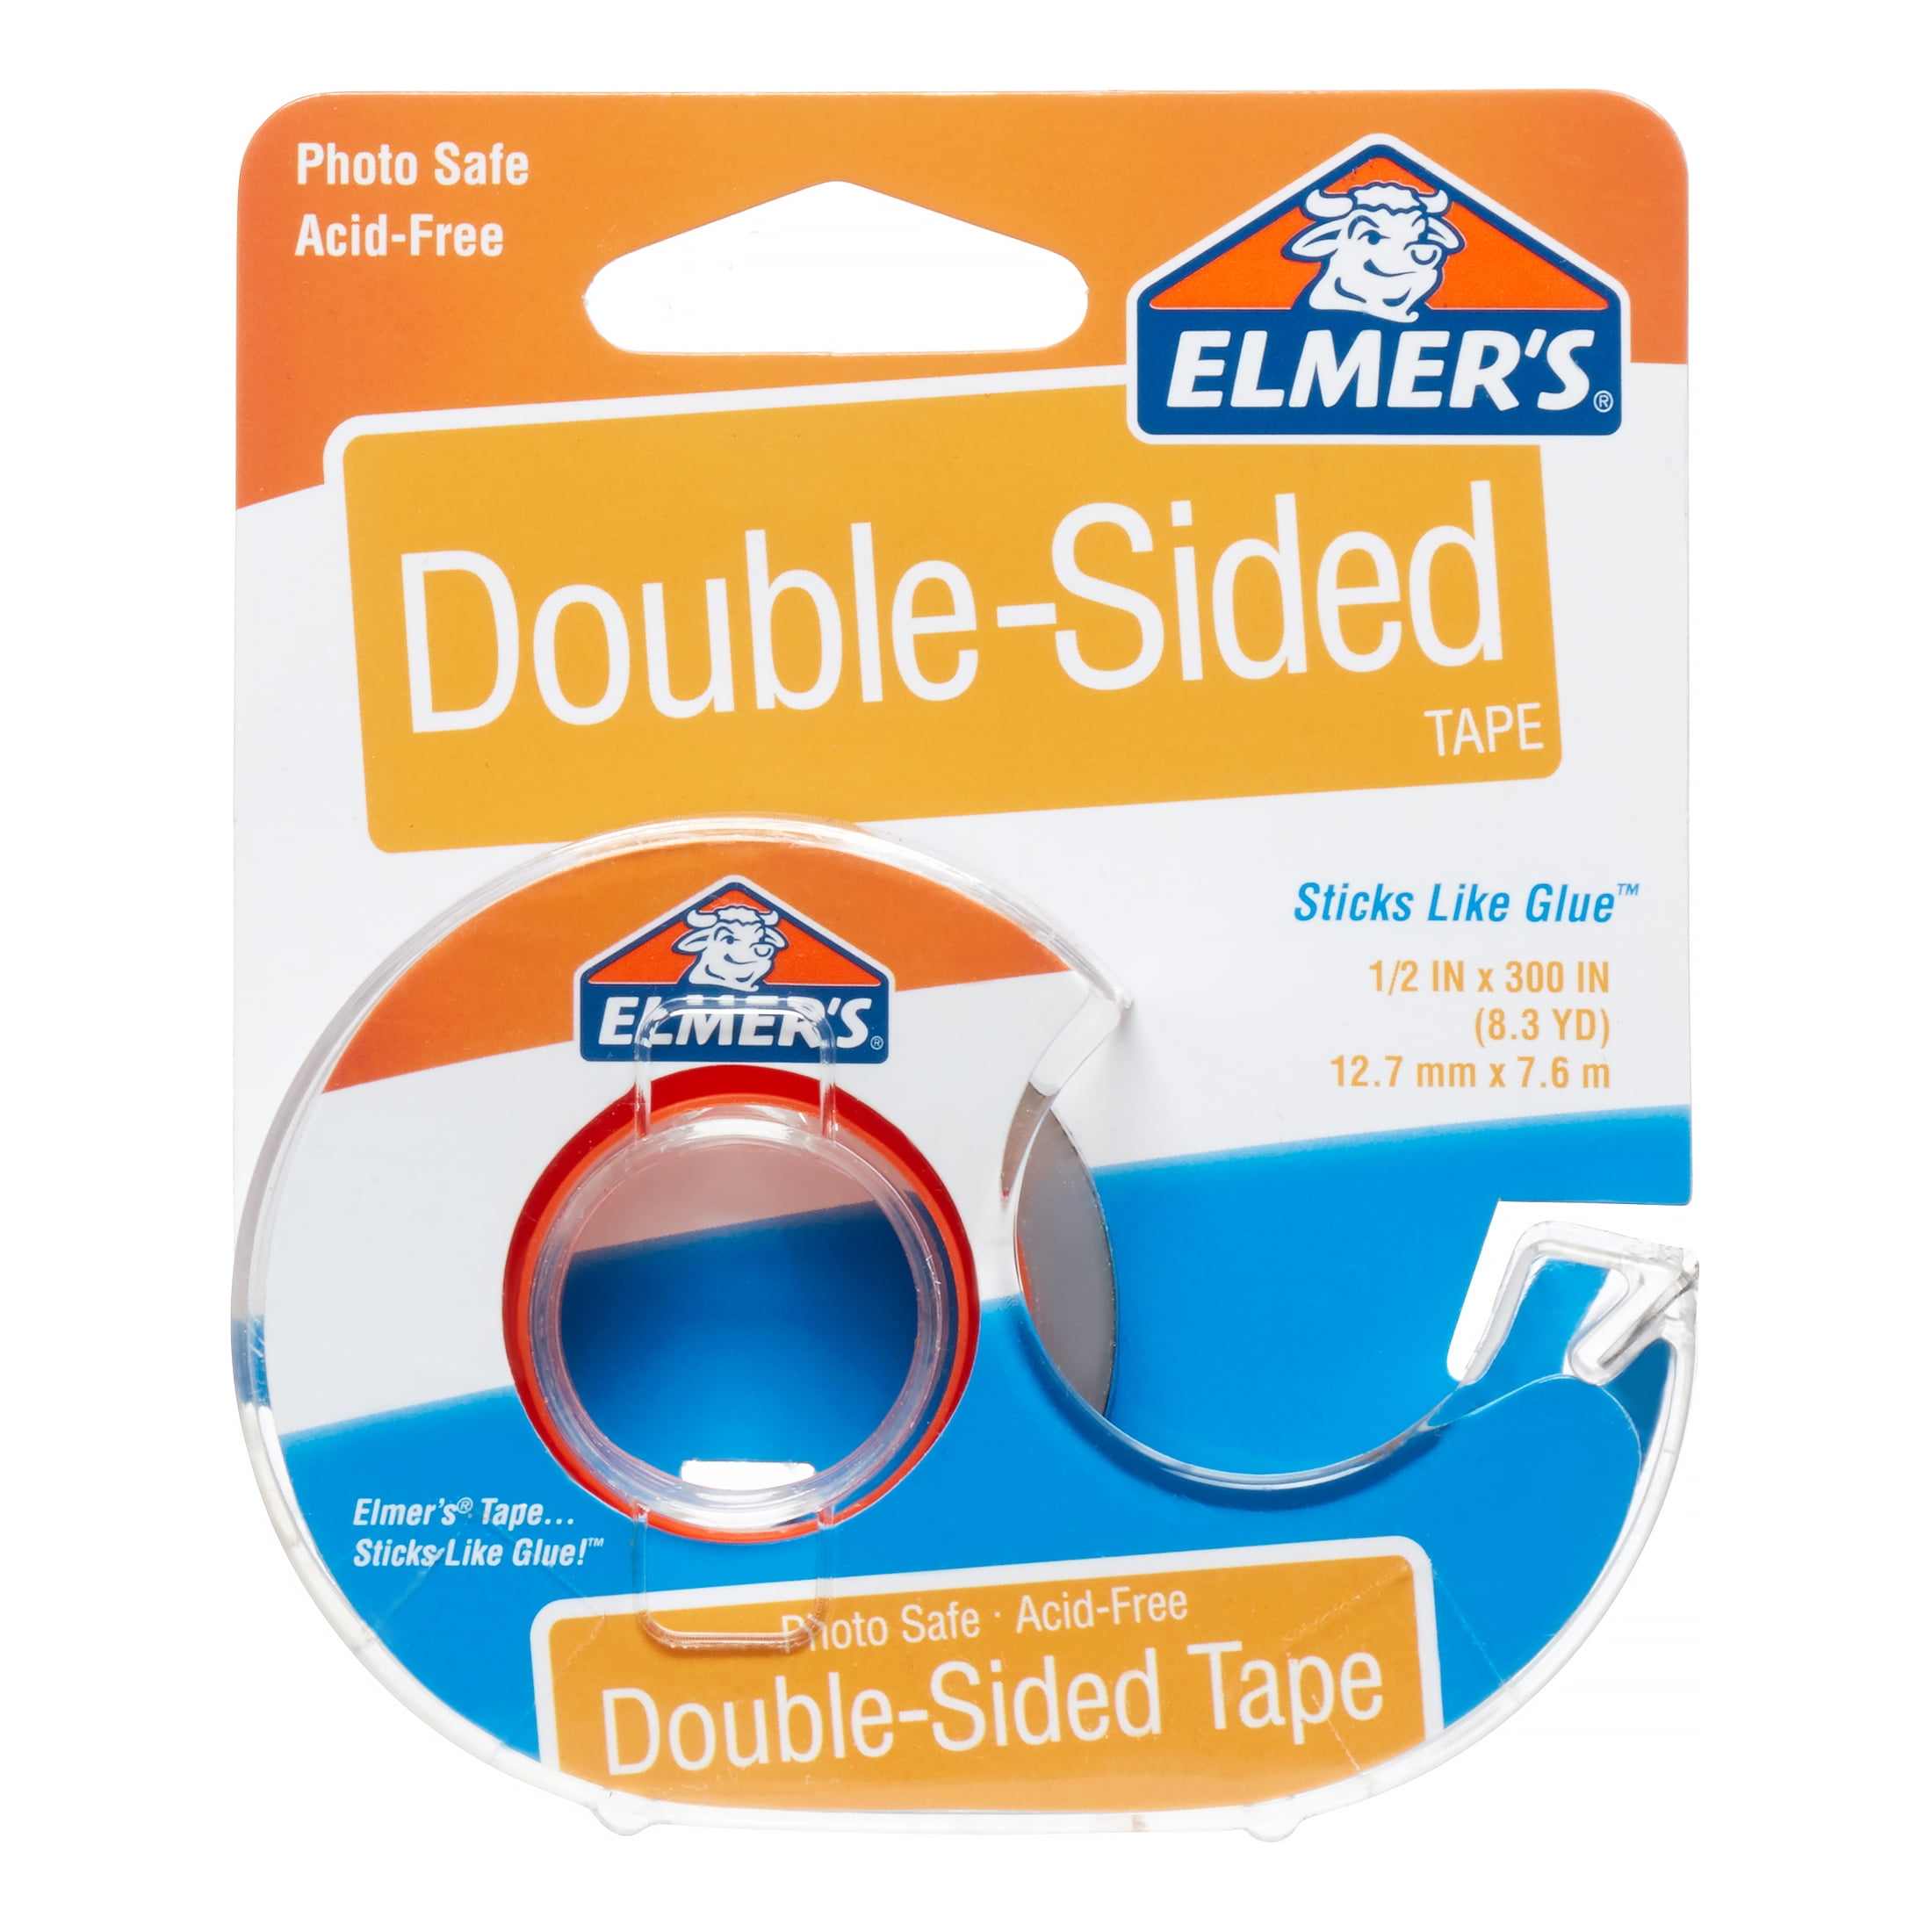 Elmer's Permanent Double Sided Tape - The Compleat Sculptor